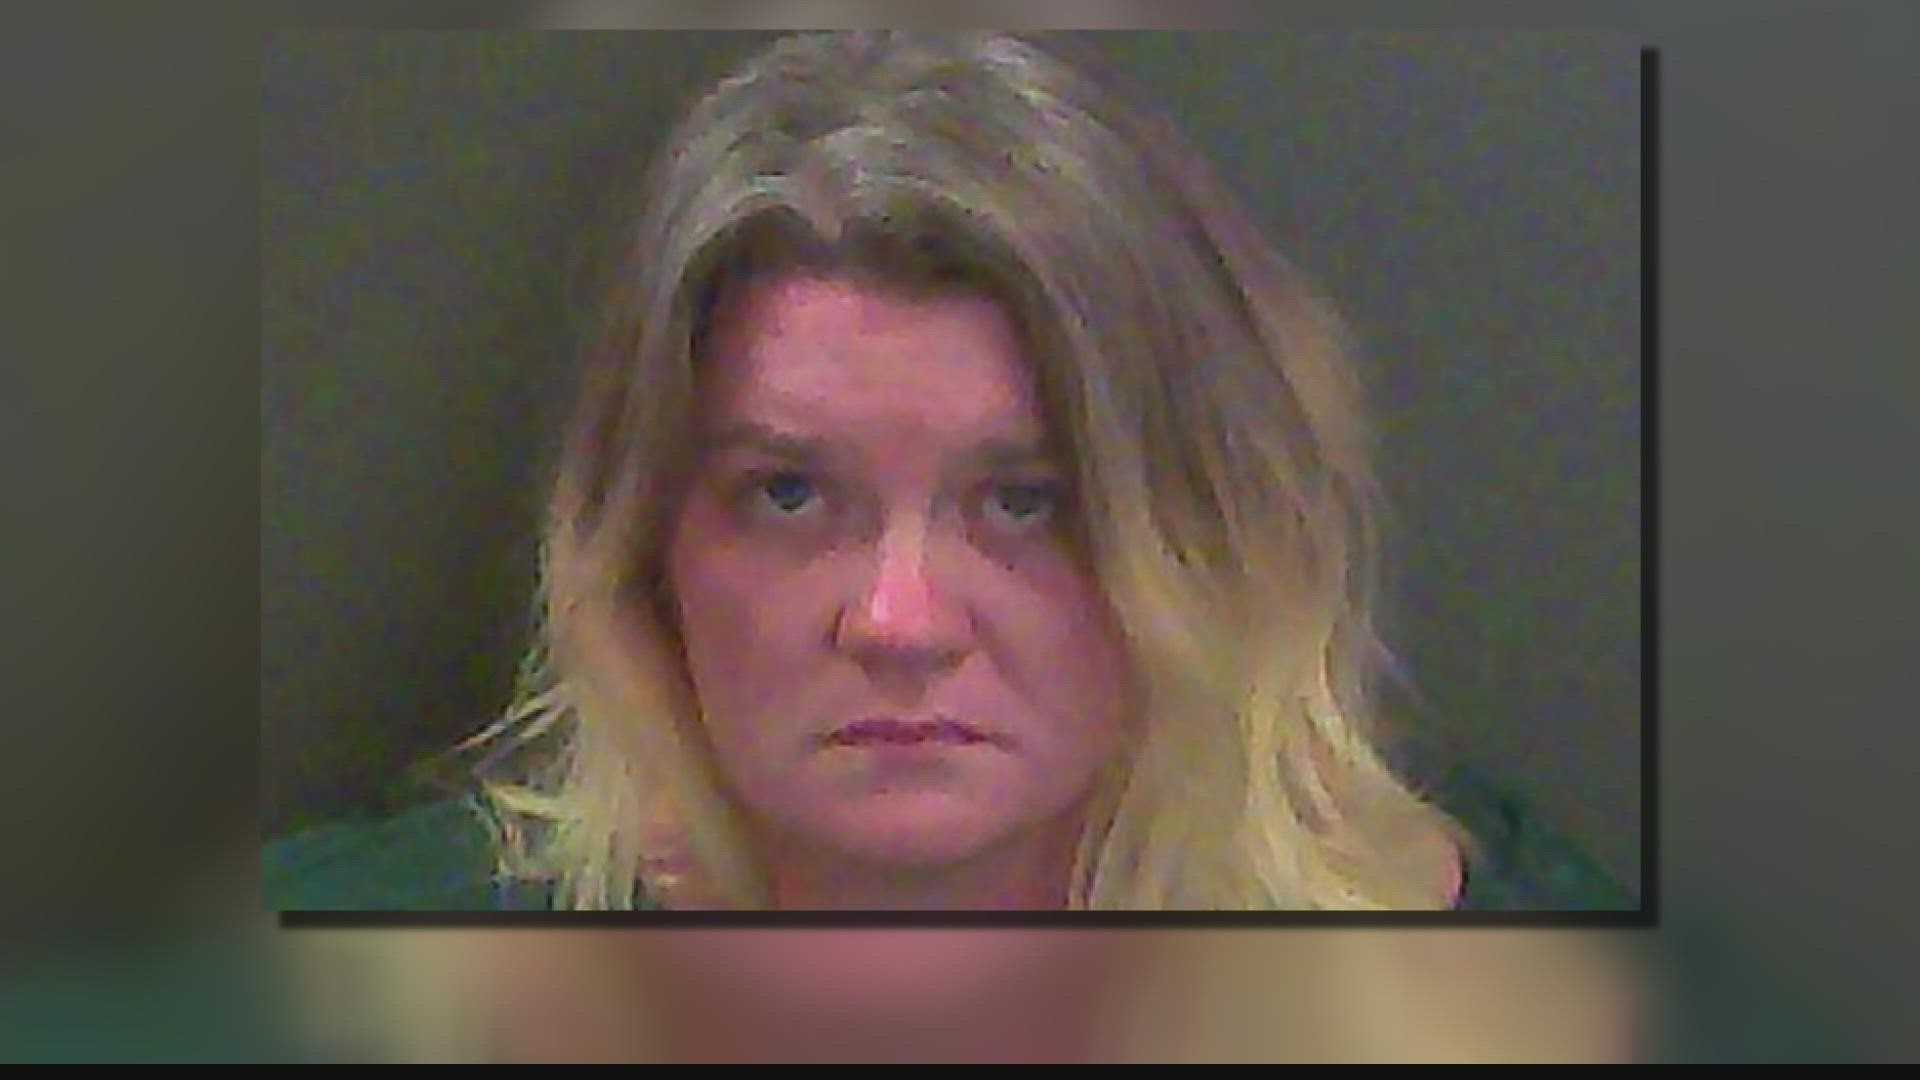 Amanda Carmack was found guilty of murder and other charges in the death of her 10-year-old stepdaughter.